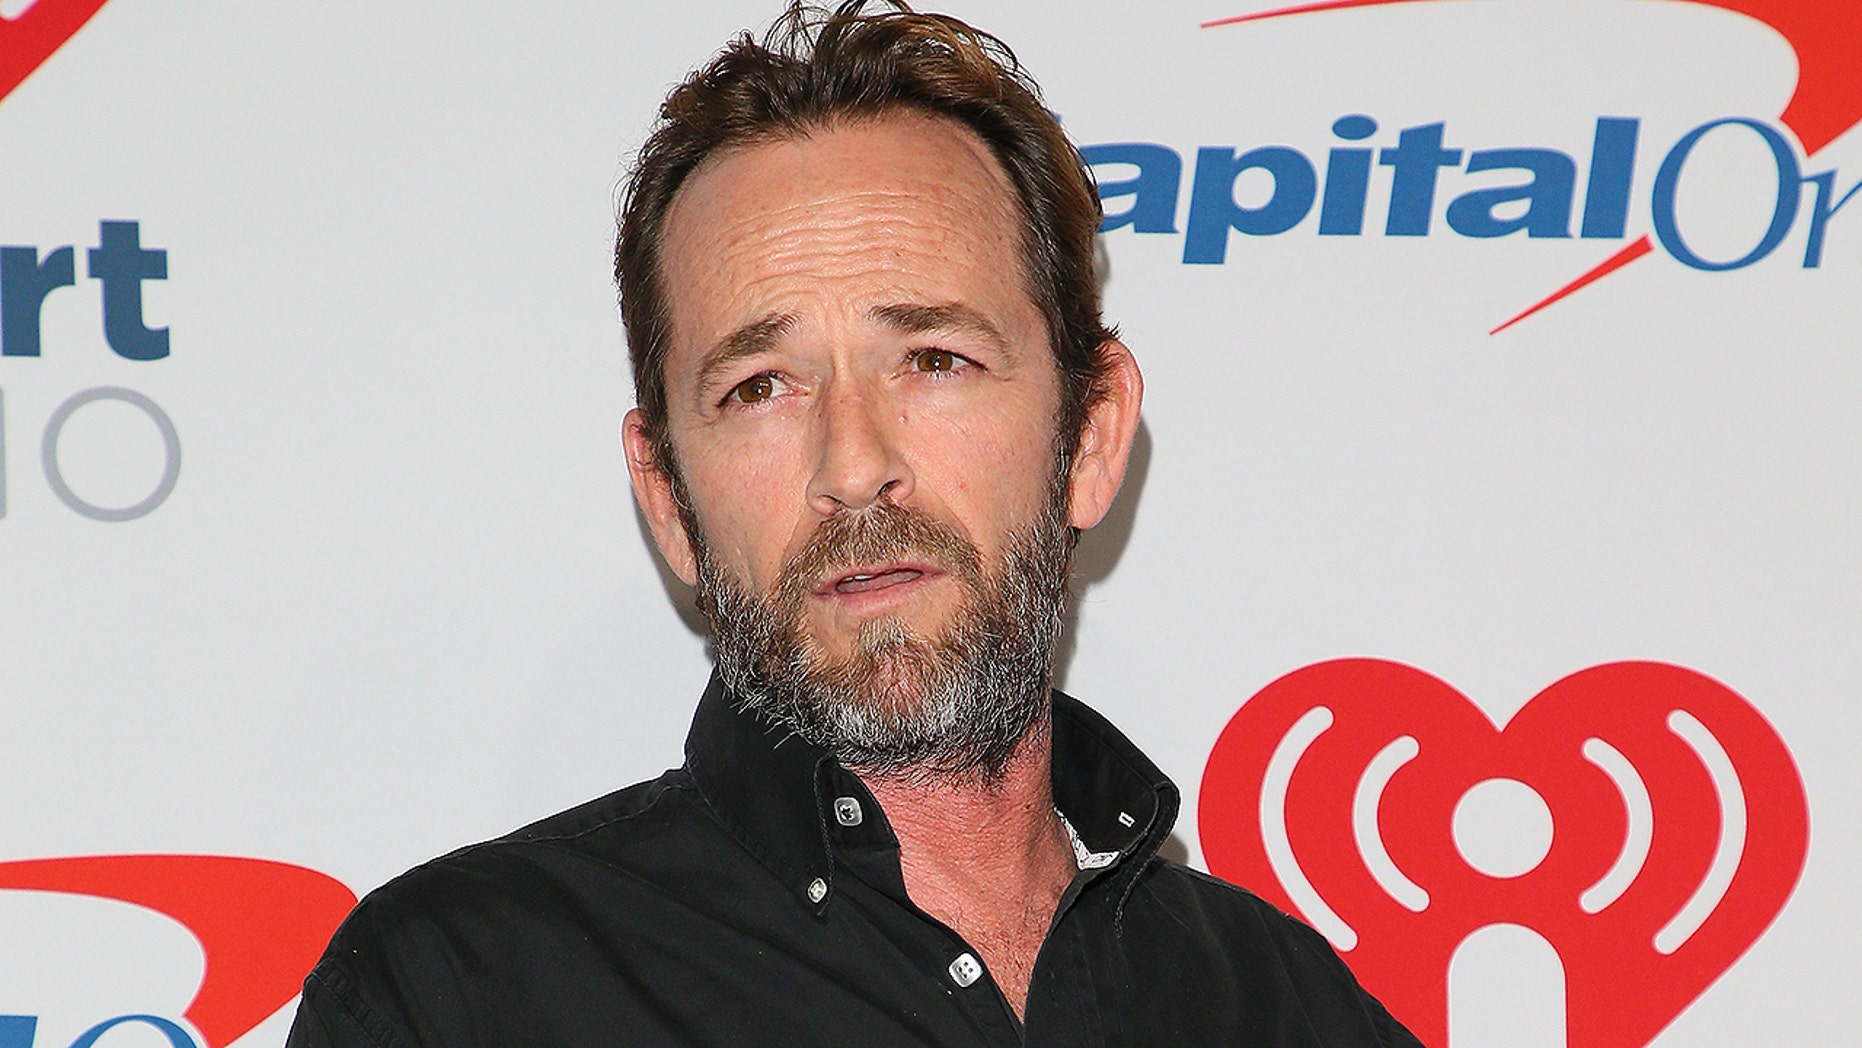 Luke Perry, '90210' and 'Riverdale' star, 'under observation' at the hospital, rep says - Fox News